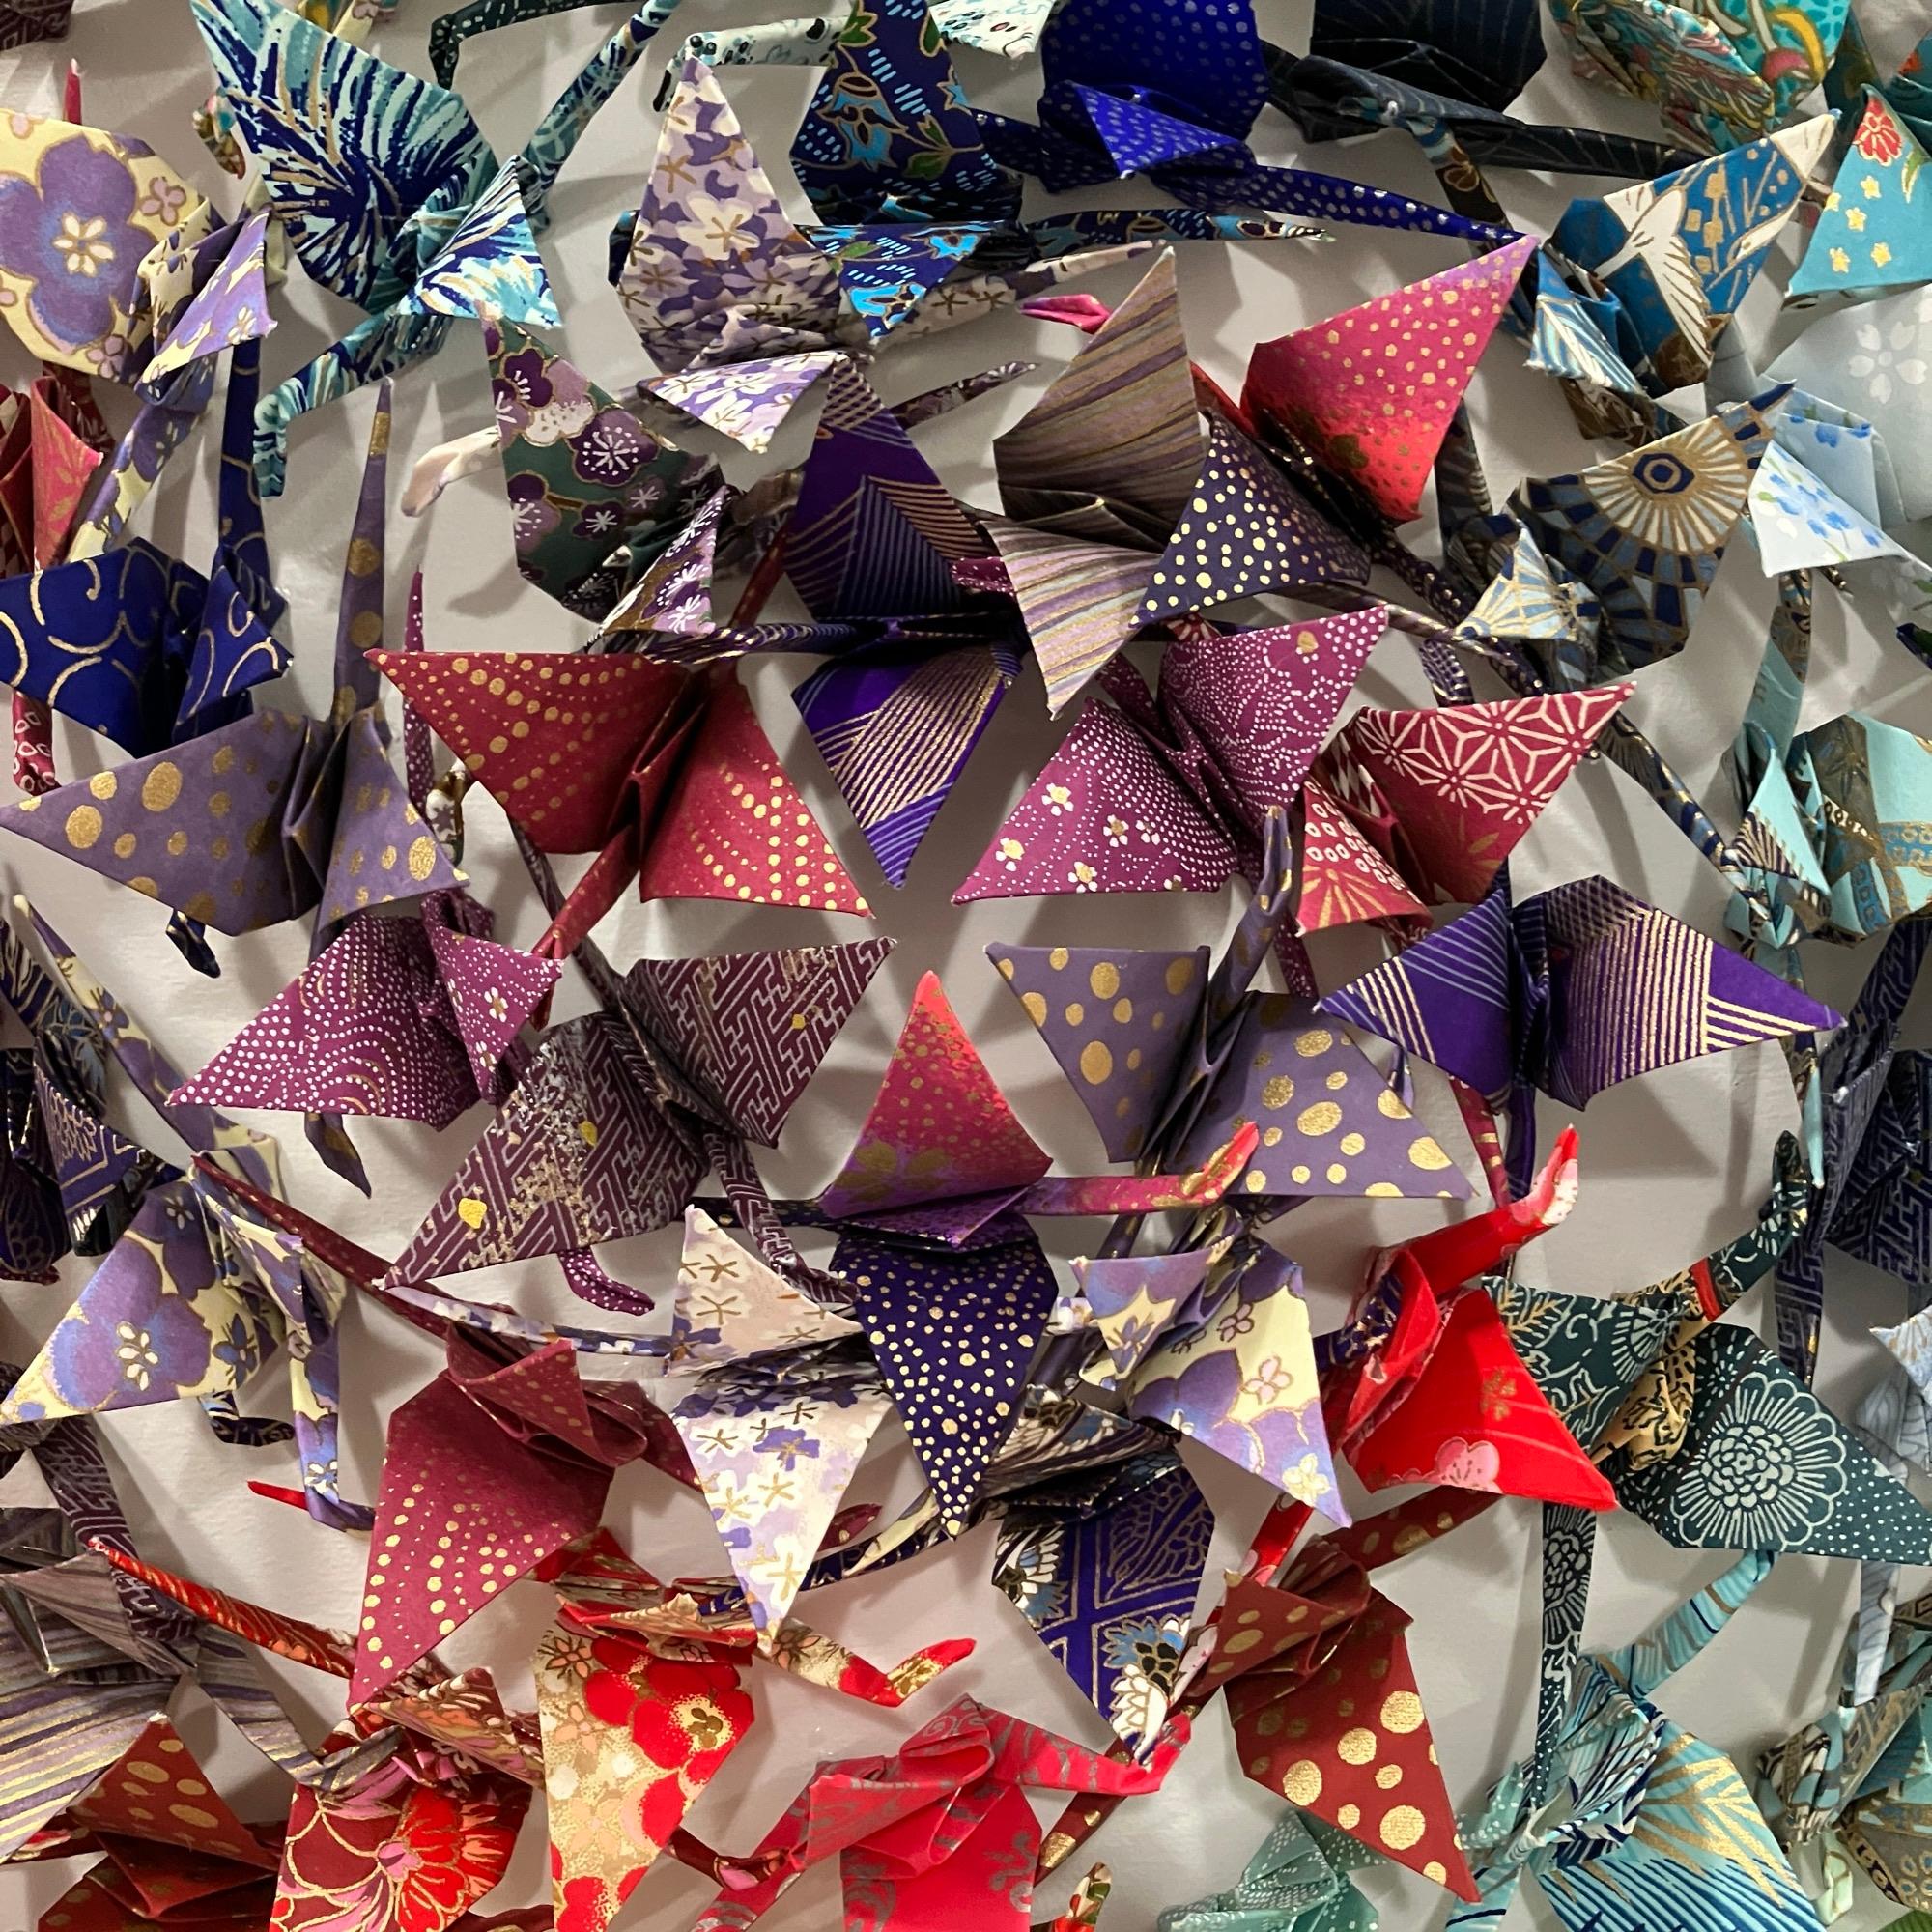 This unique origami piece features hundreds of hand folded chiyogami paper cranes mounted precisely on wood panel and framed in an elegant acrylic shadow box.

Andrew Wang unearths great journeys through origami assemblage, influenced by his